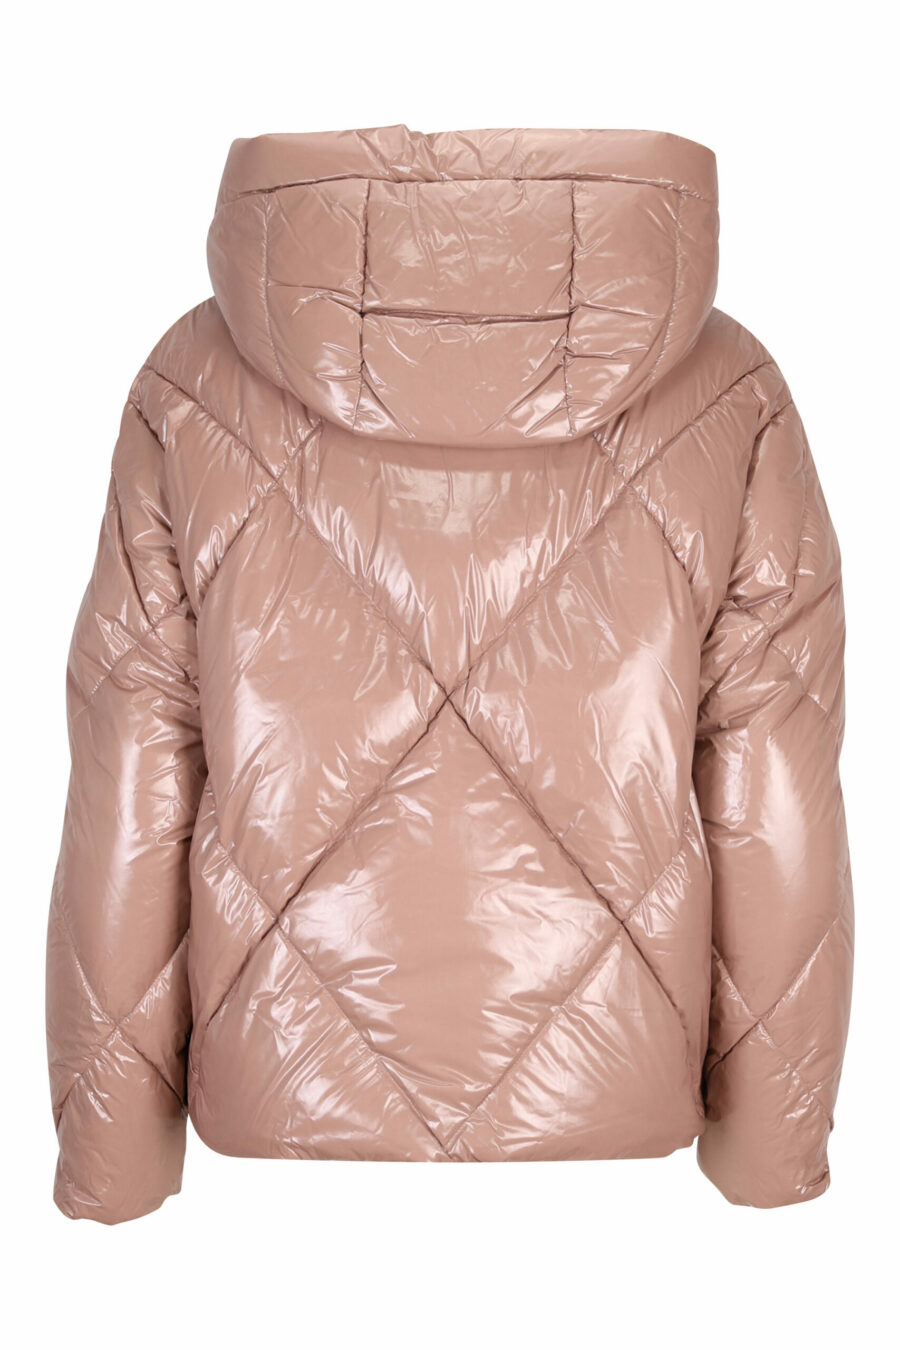 Pale pink hooded jacket with diagonal lines and logo patch - 8058610611965 2 scaled